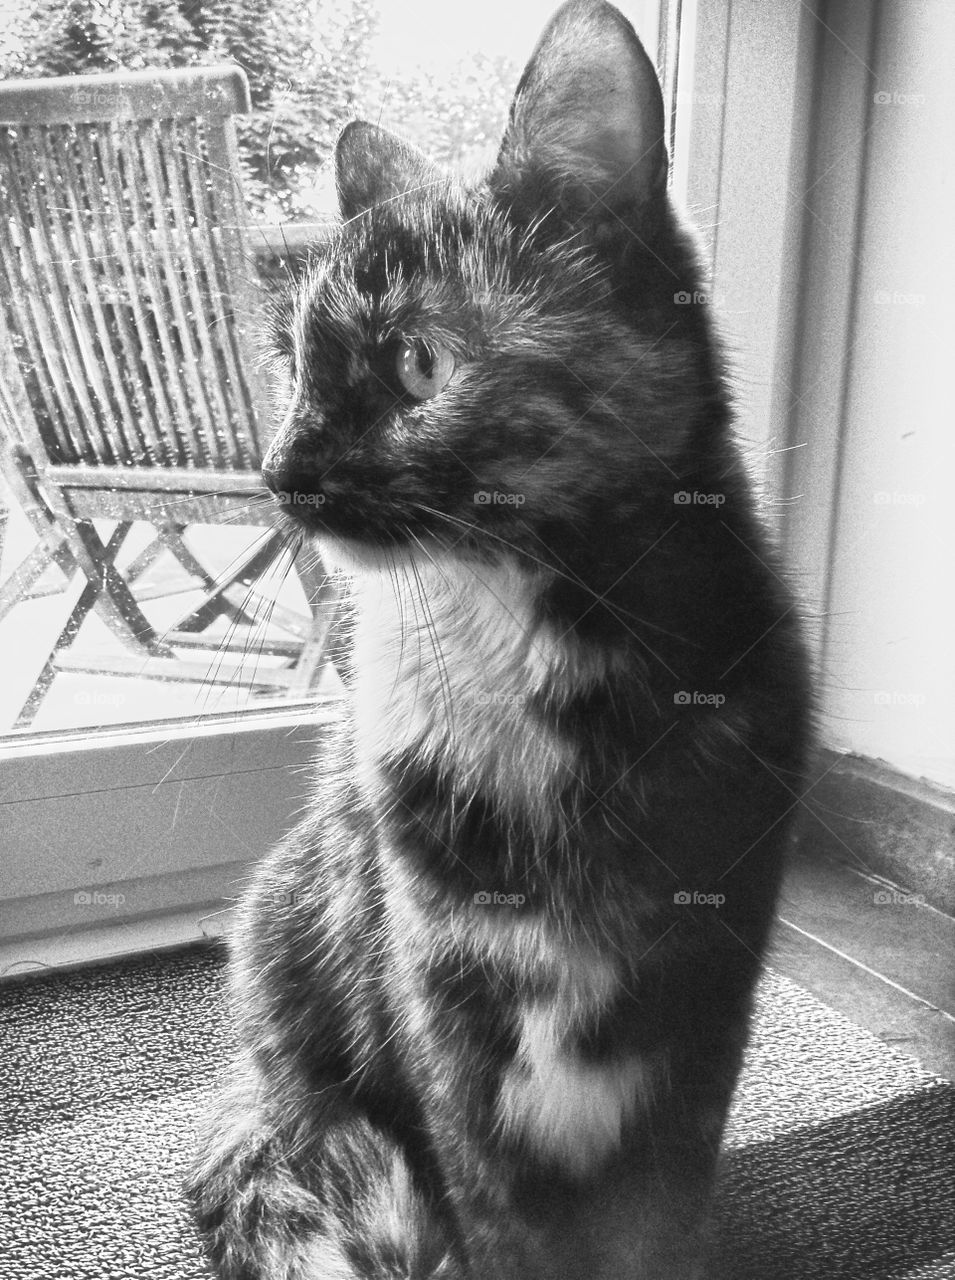 A cat in black and white